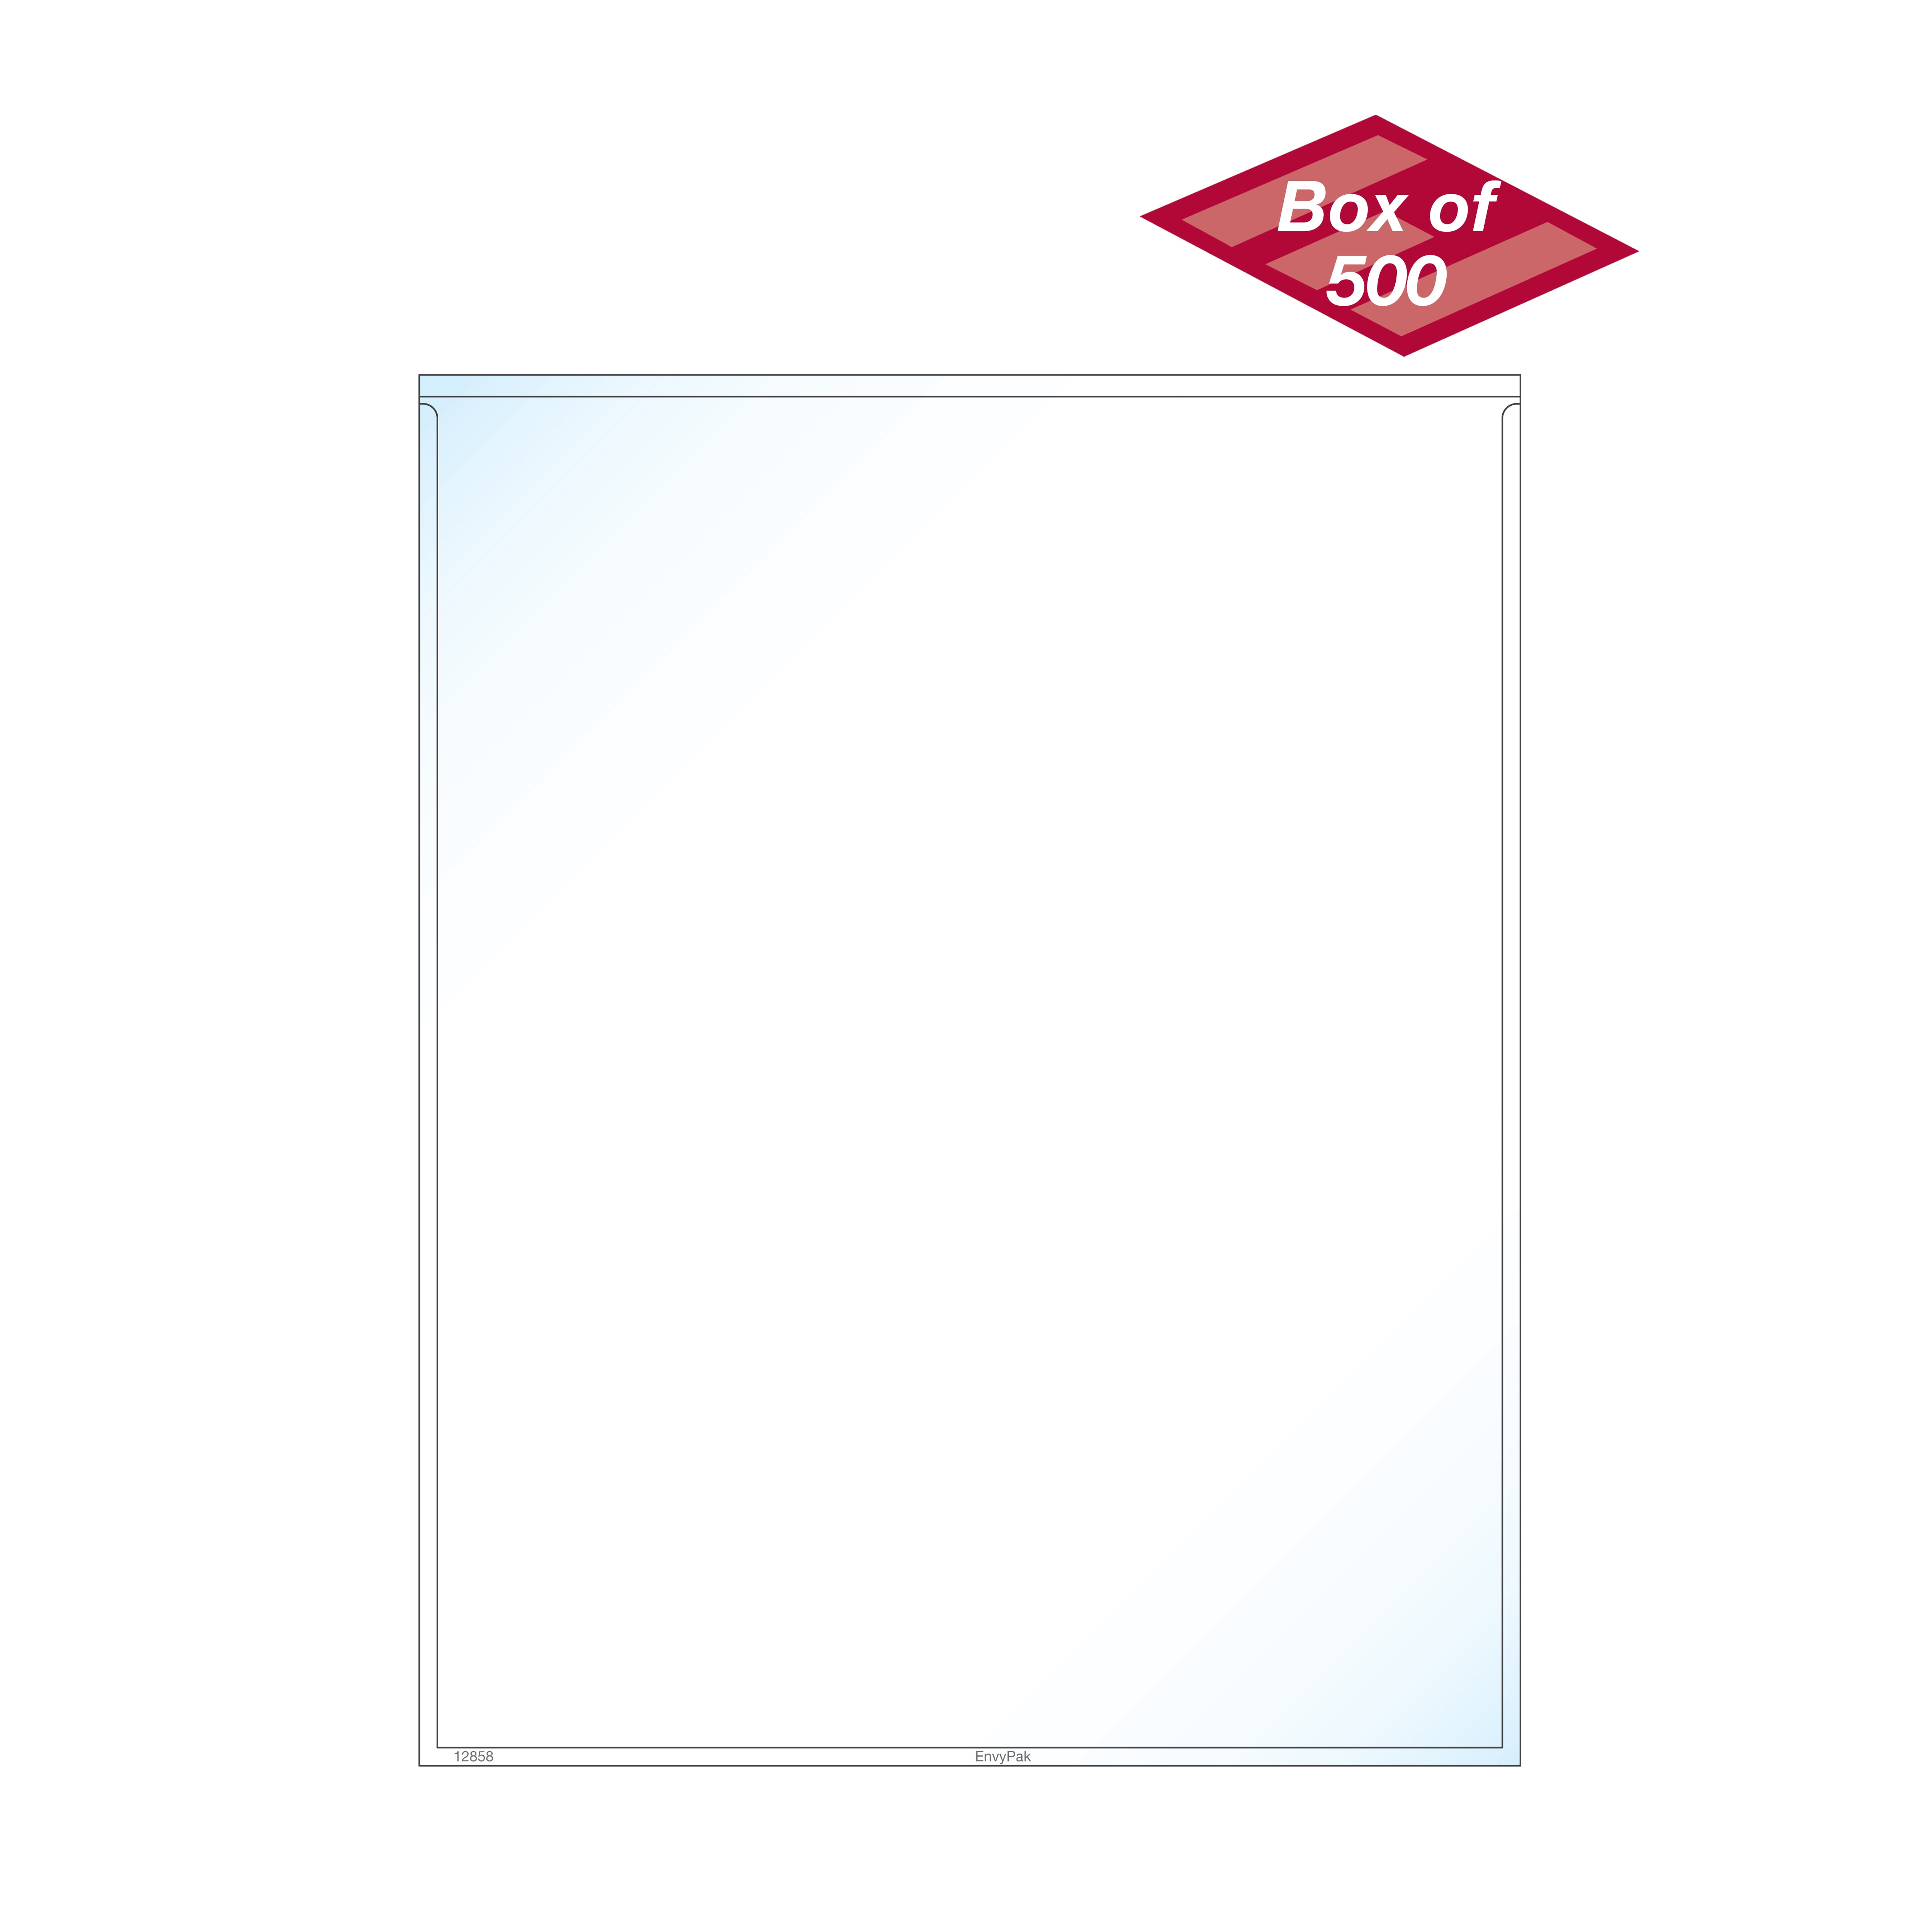 Adhesive Full Page Pocket, 8.5 x 11 inch - Pack of 50 - Made in USA